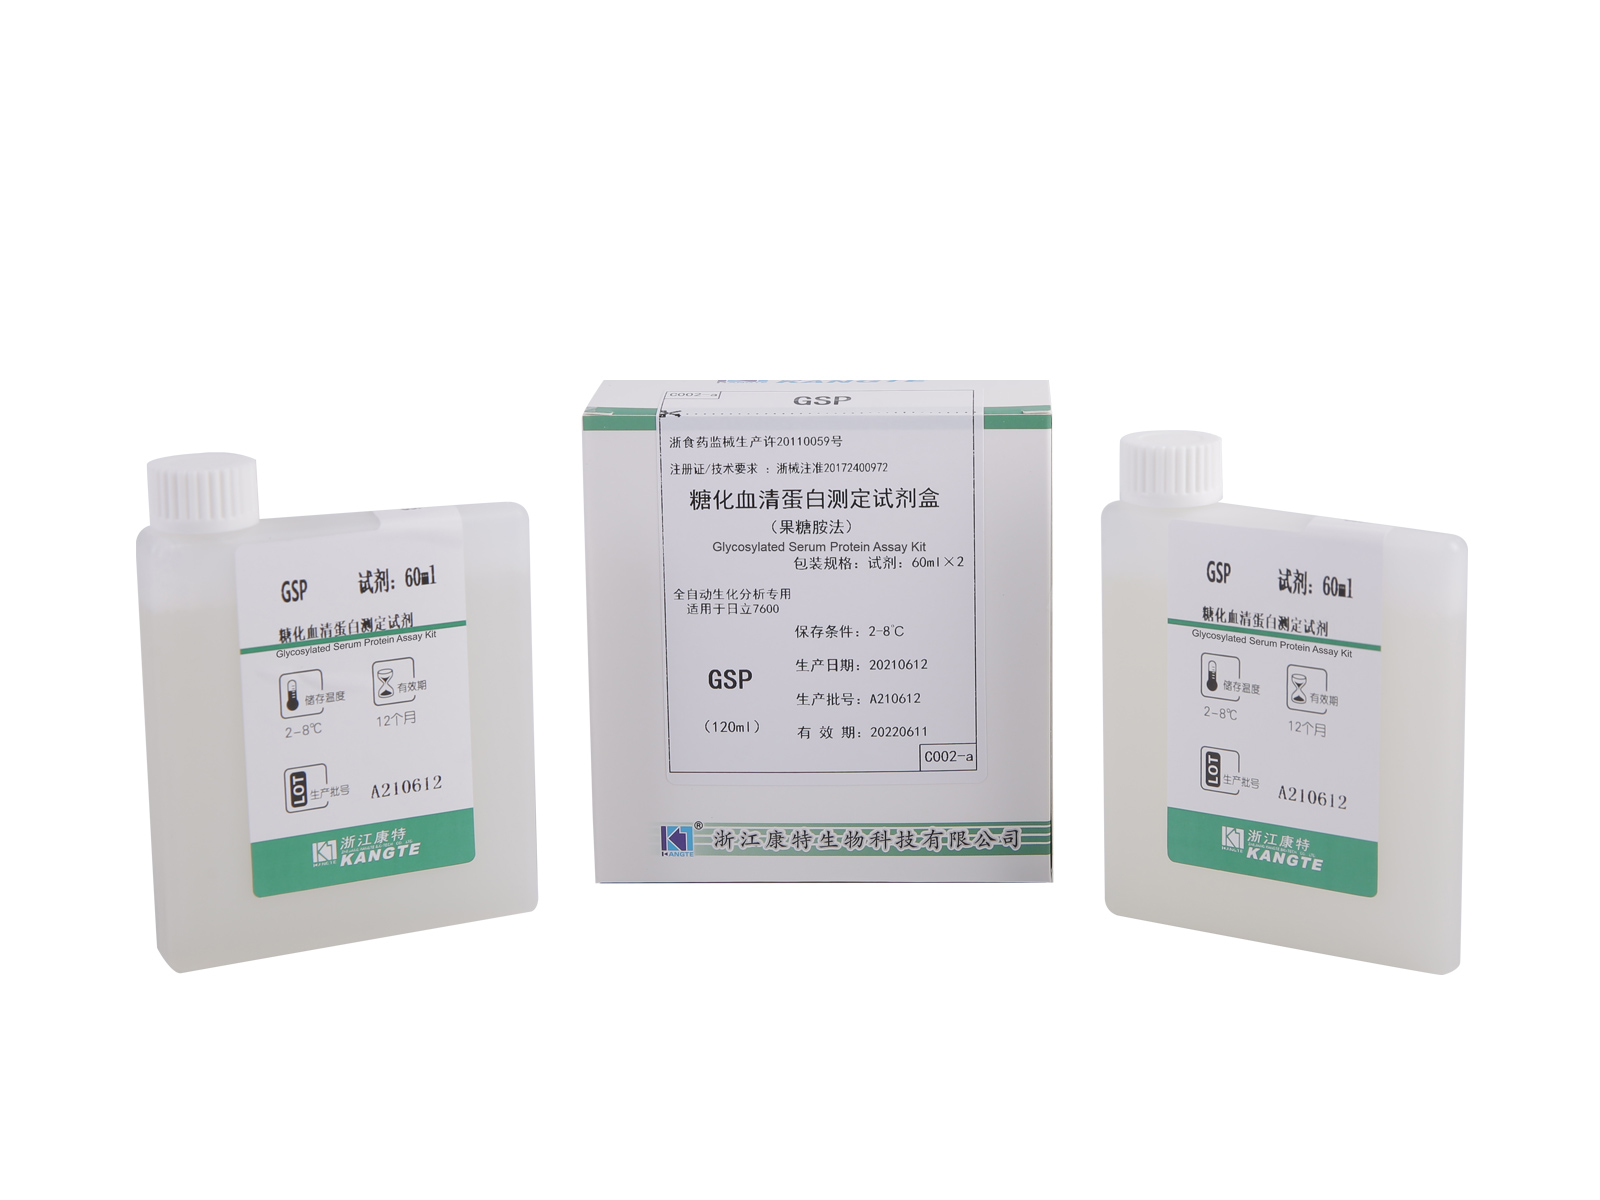 detail of 【GSP】Glycosylated Serum Protein Assay Kit (Fructosamine-methode)